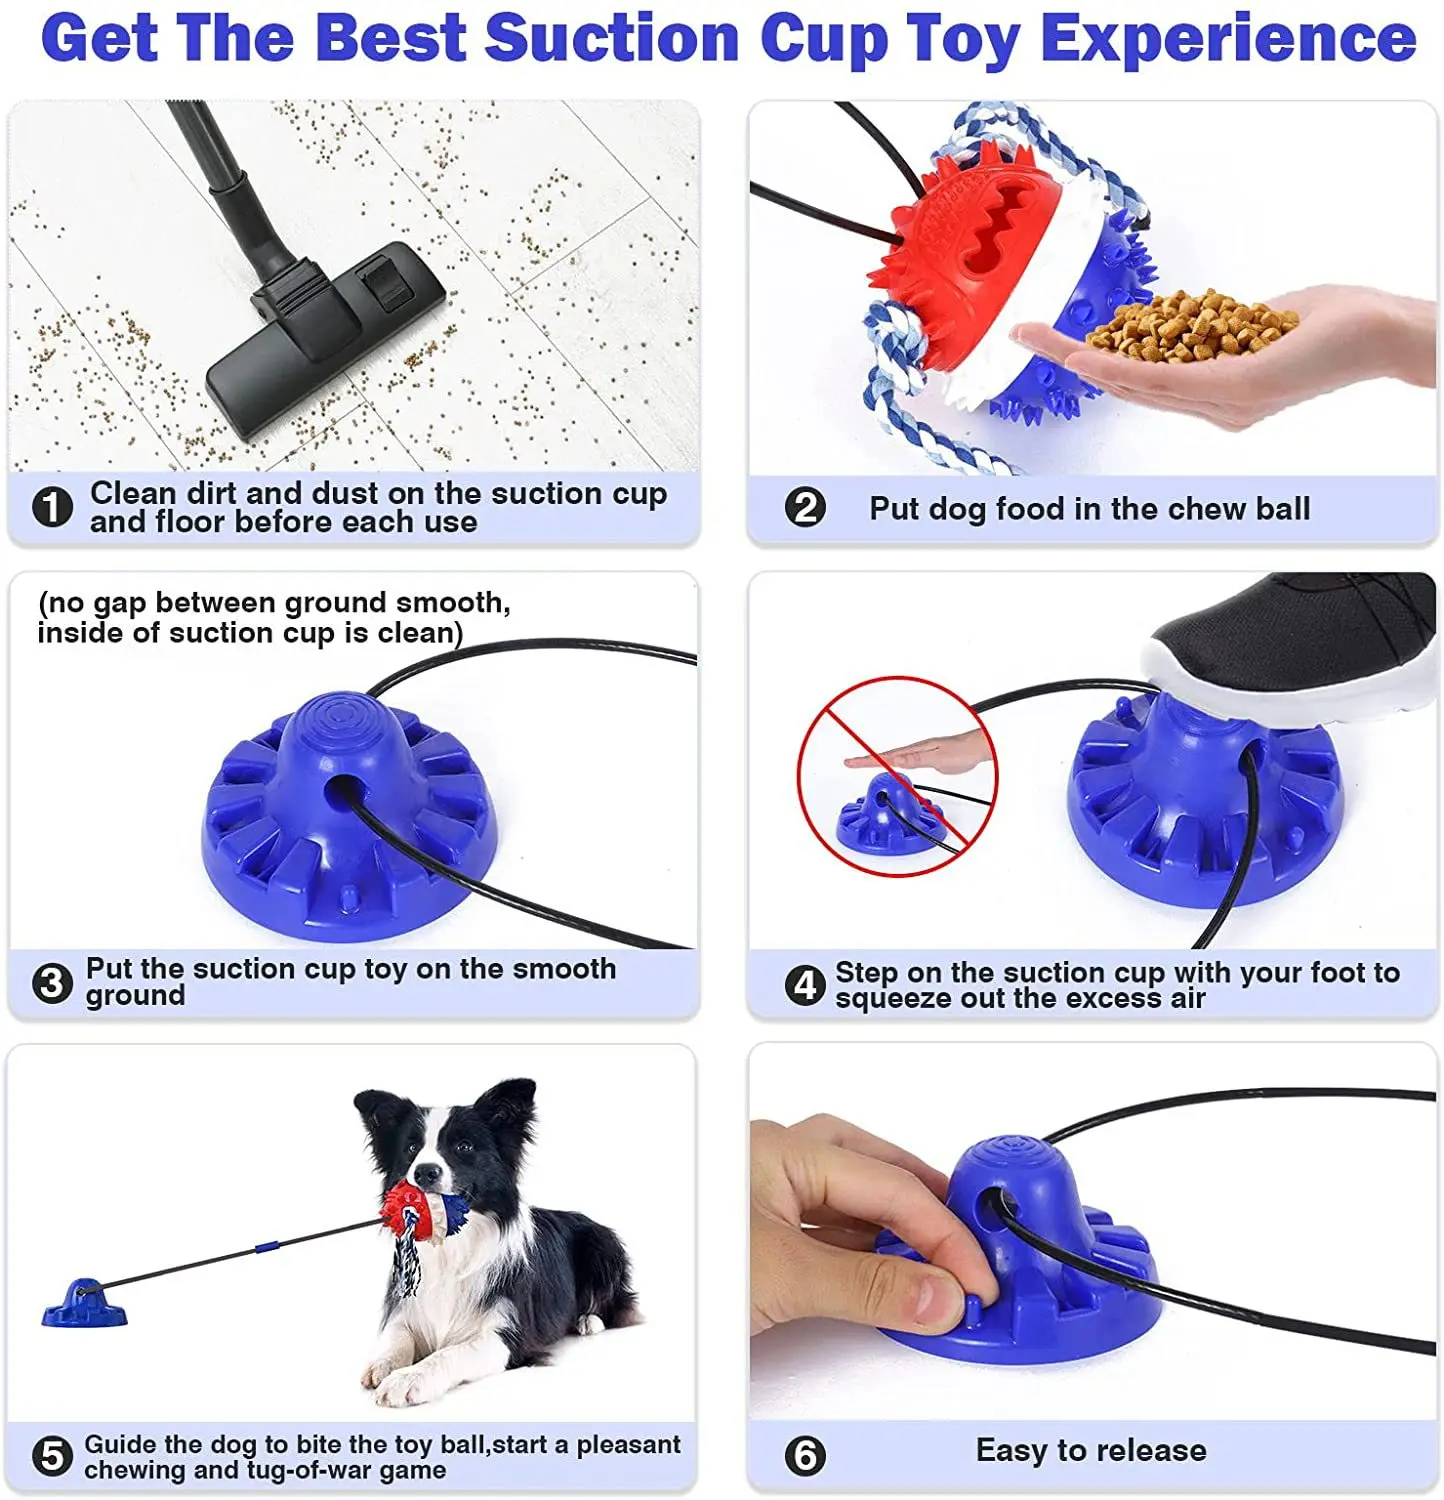 Suction Cup Dog Toy - Tug Toy for Dogs - Puppy Teething Chew Toys -  Improves Pet's Dental Health and IQ - Relieves Pet Anxiety - Strong Suction  for Aggressive Dogs 